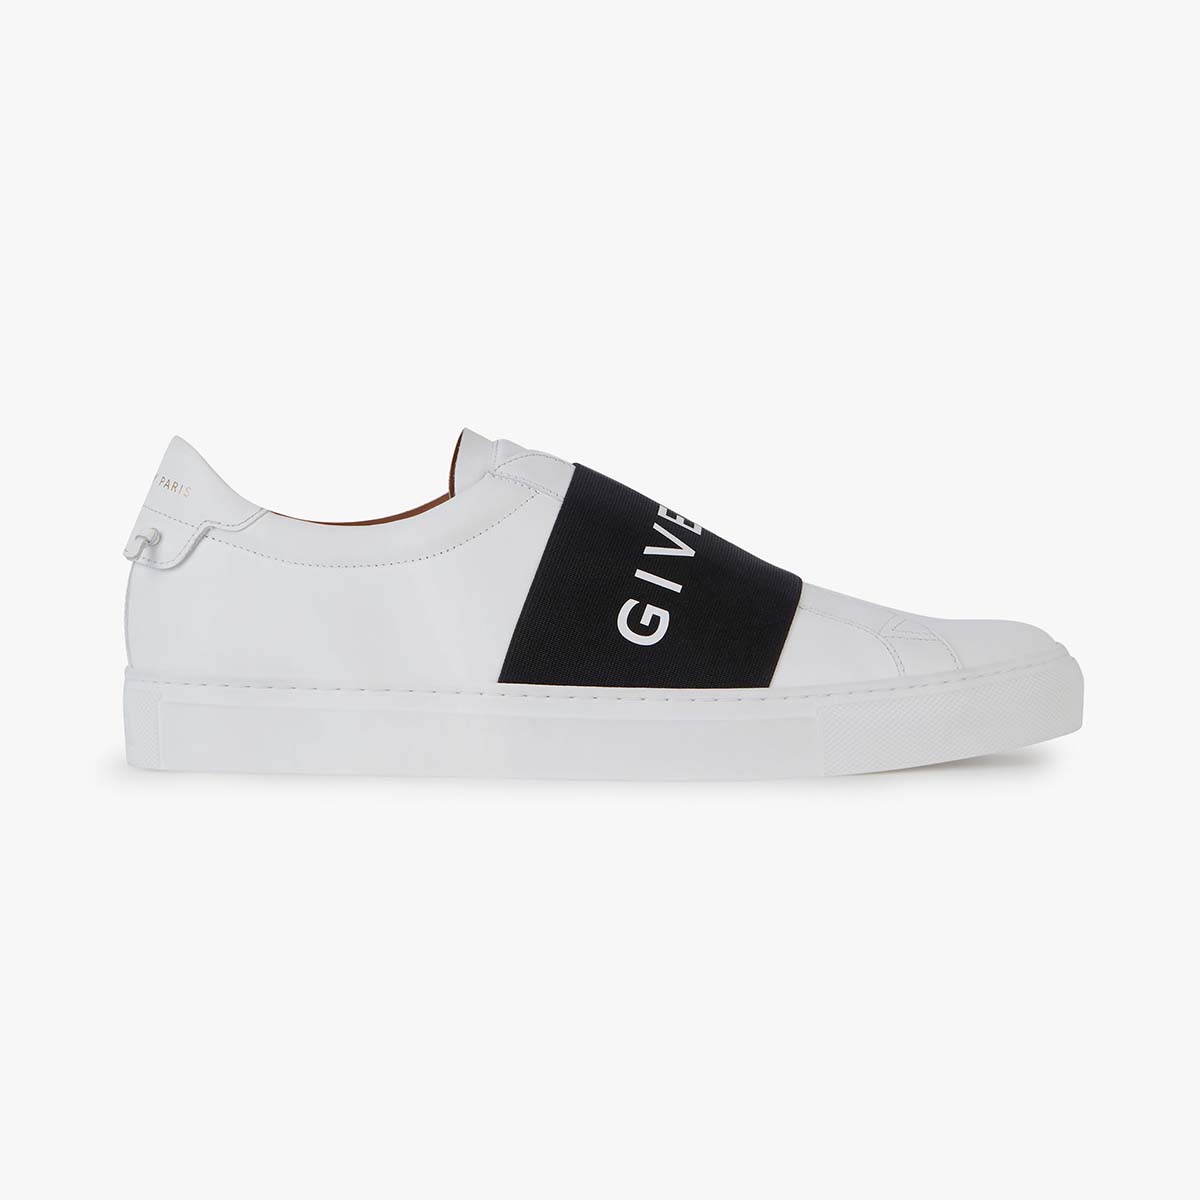 Givenchy Men Givenchy Paris Strap Sneakers in Leather Shoes White